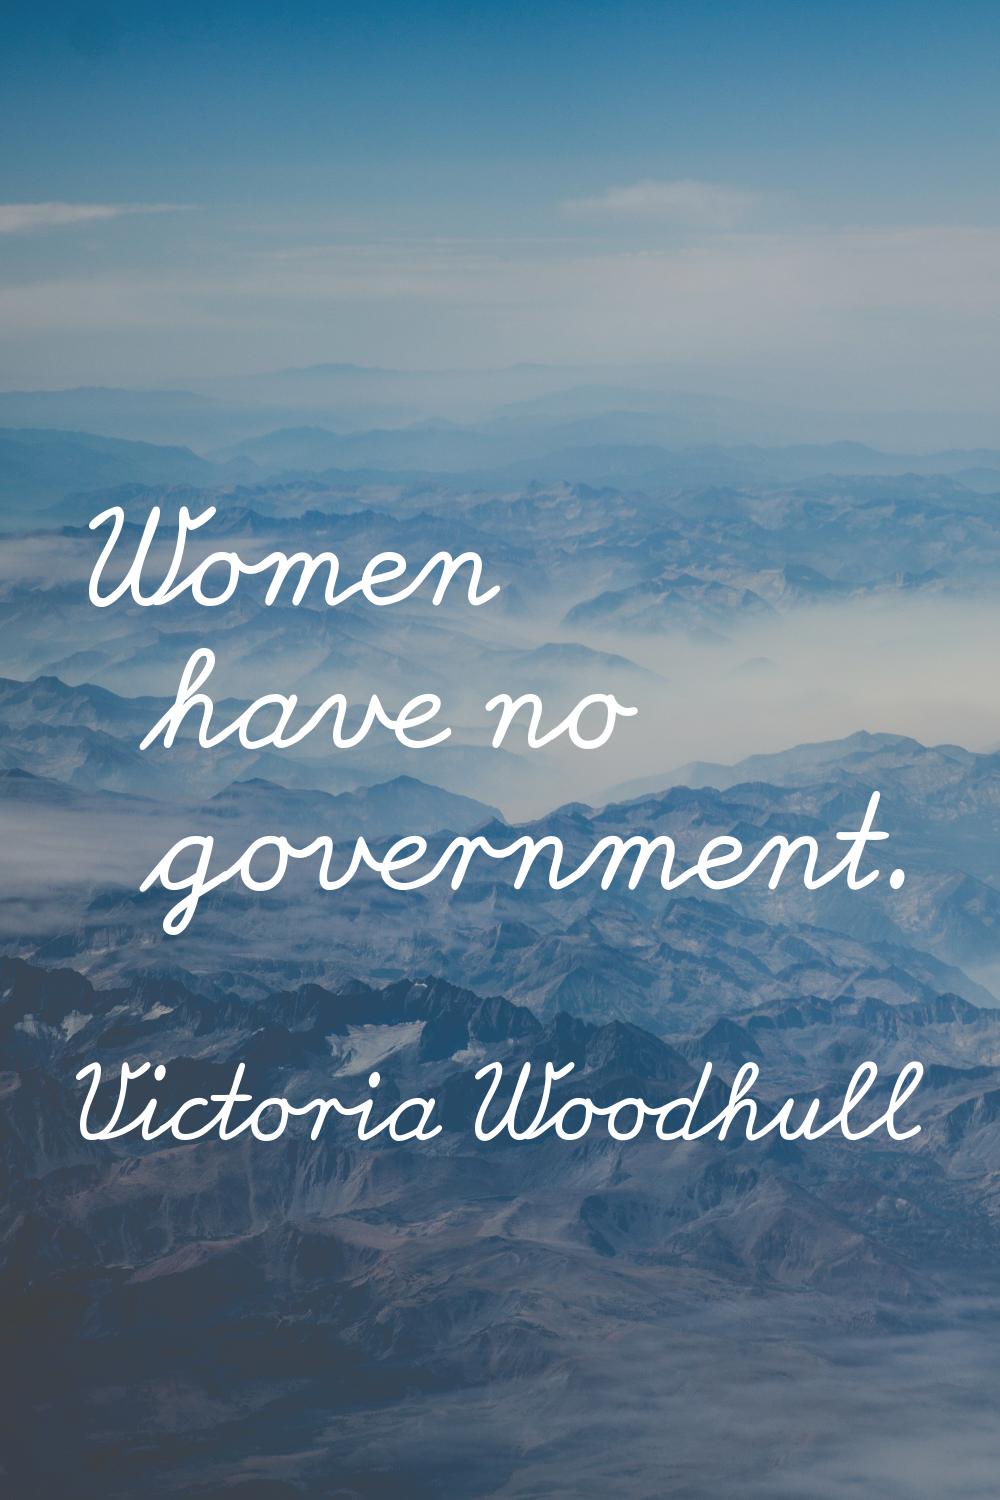 Women have no government.